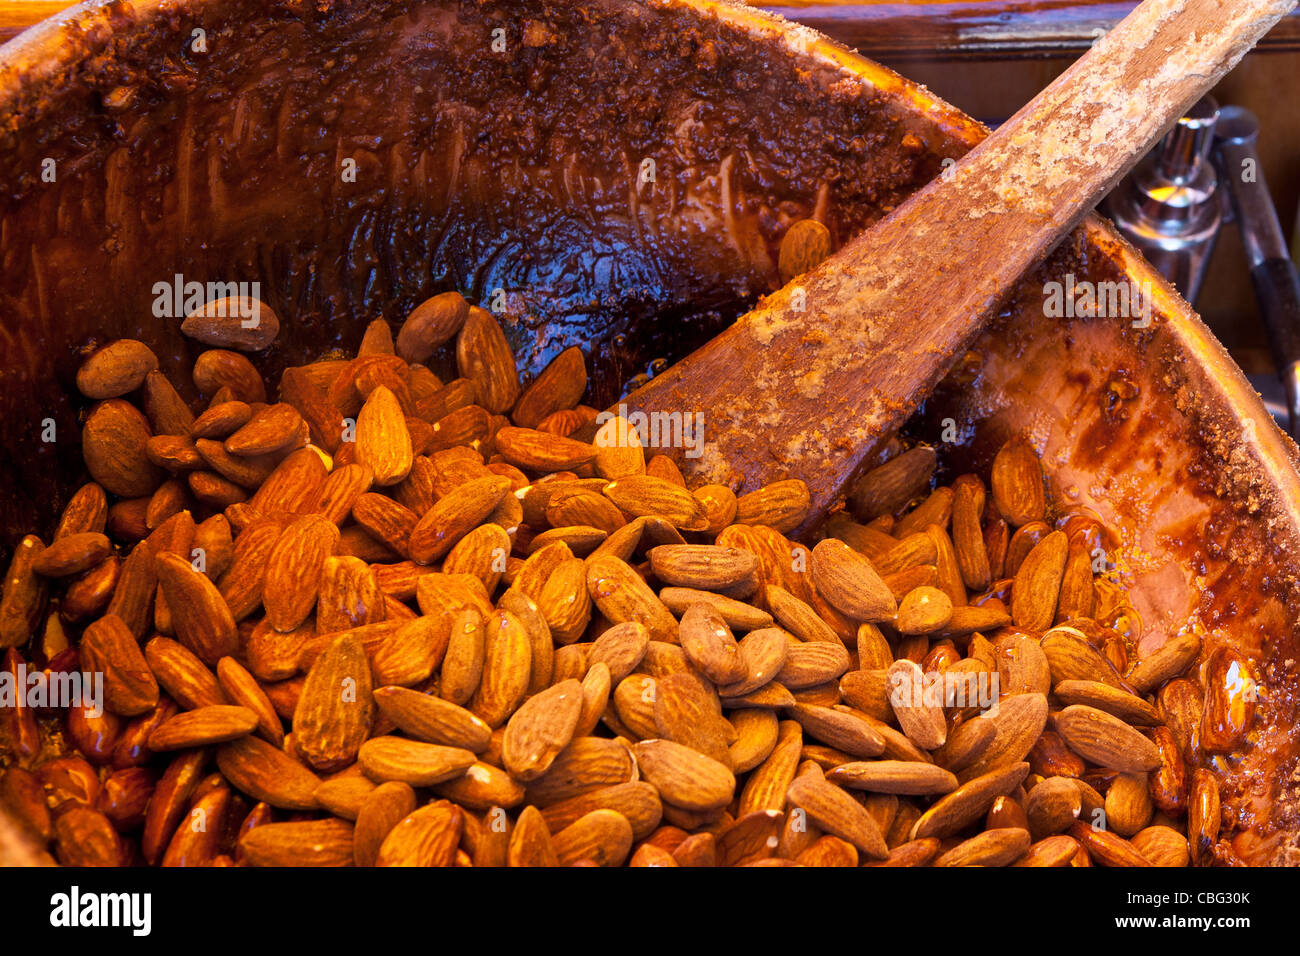 Cooked Almonds And Peanuts Street Food Stall Pralines Close Up 